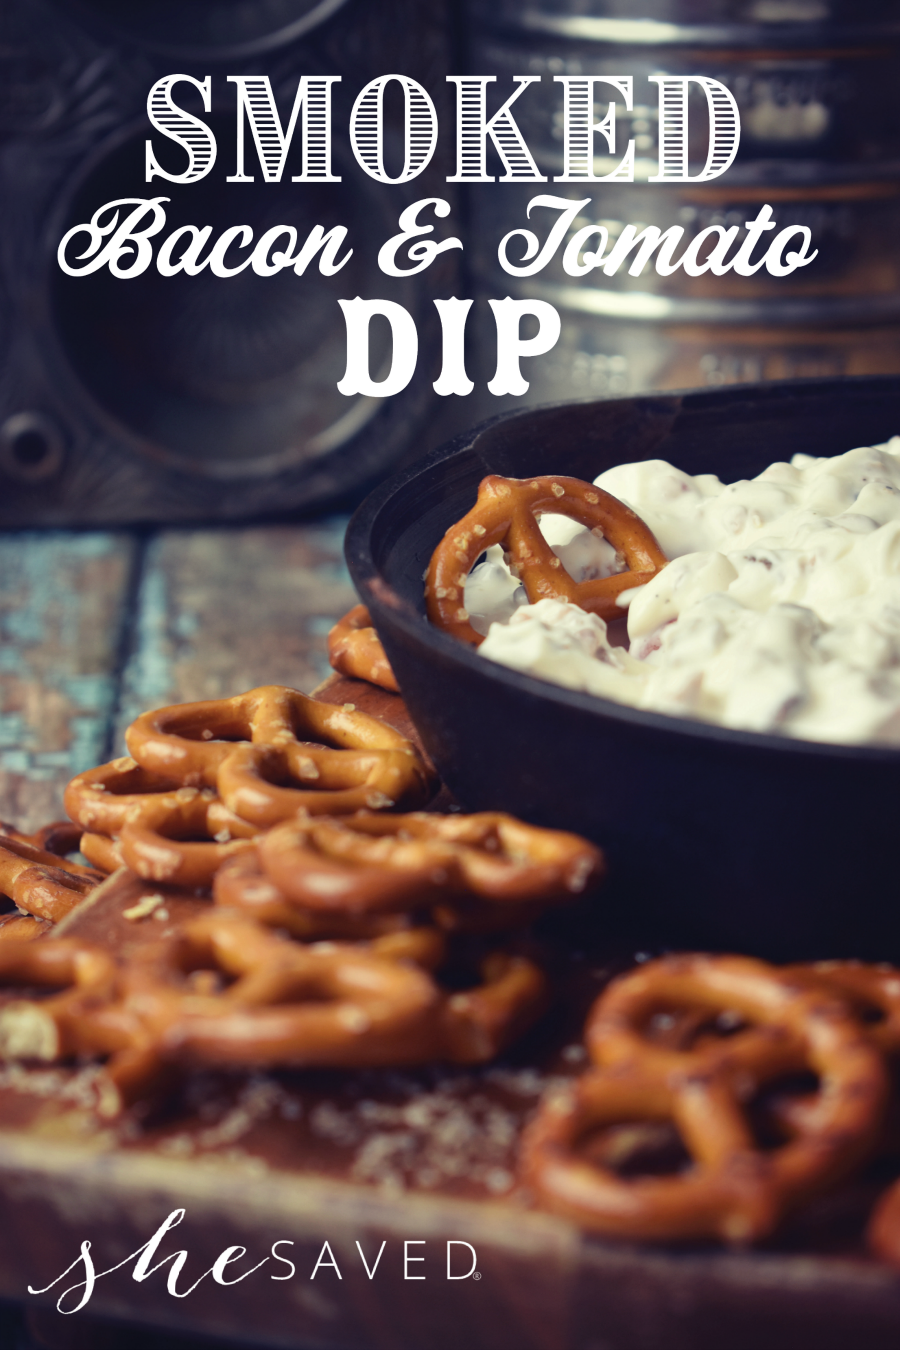 Add this recipe to your party line up: Smoked Bacon Tomato Dip 